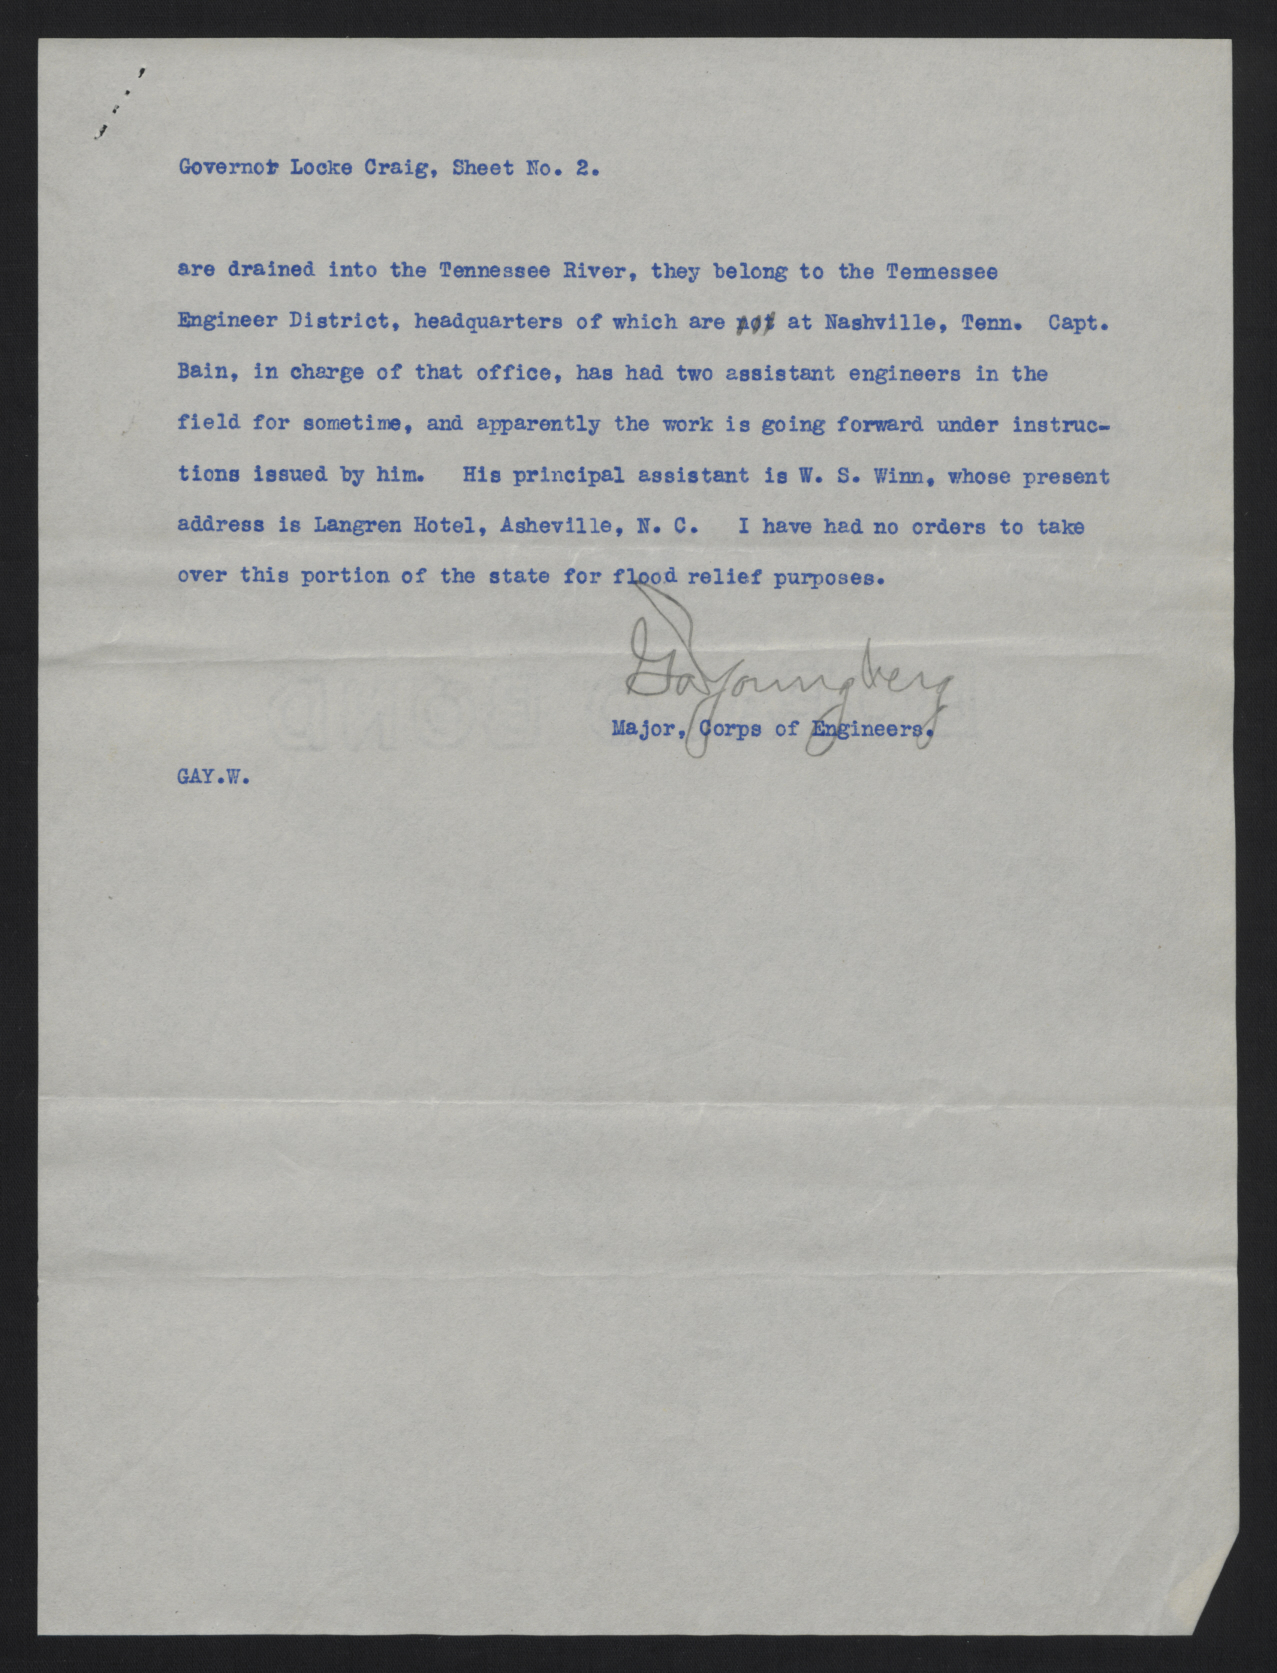 Letter from Youngberg to Craig, August 18, 1916, page 2